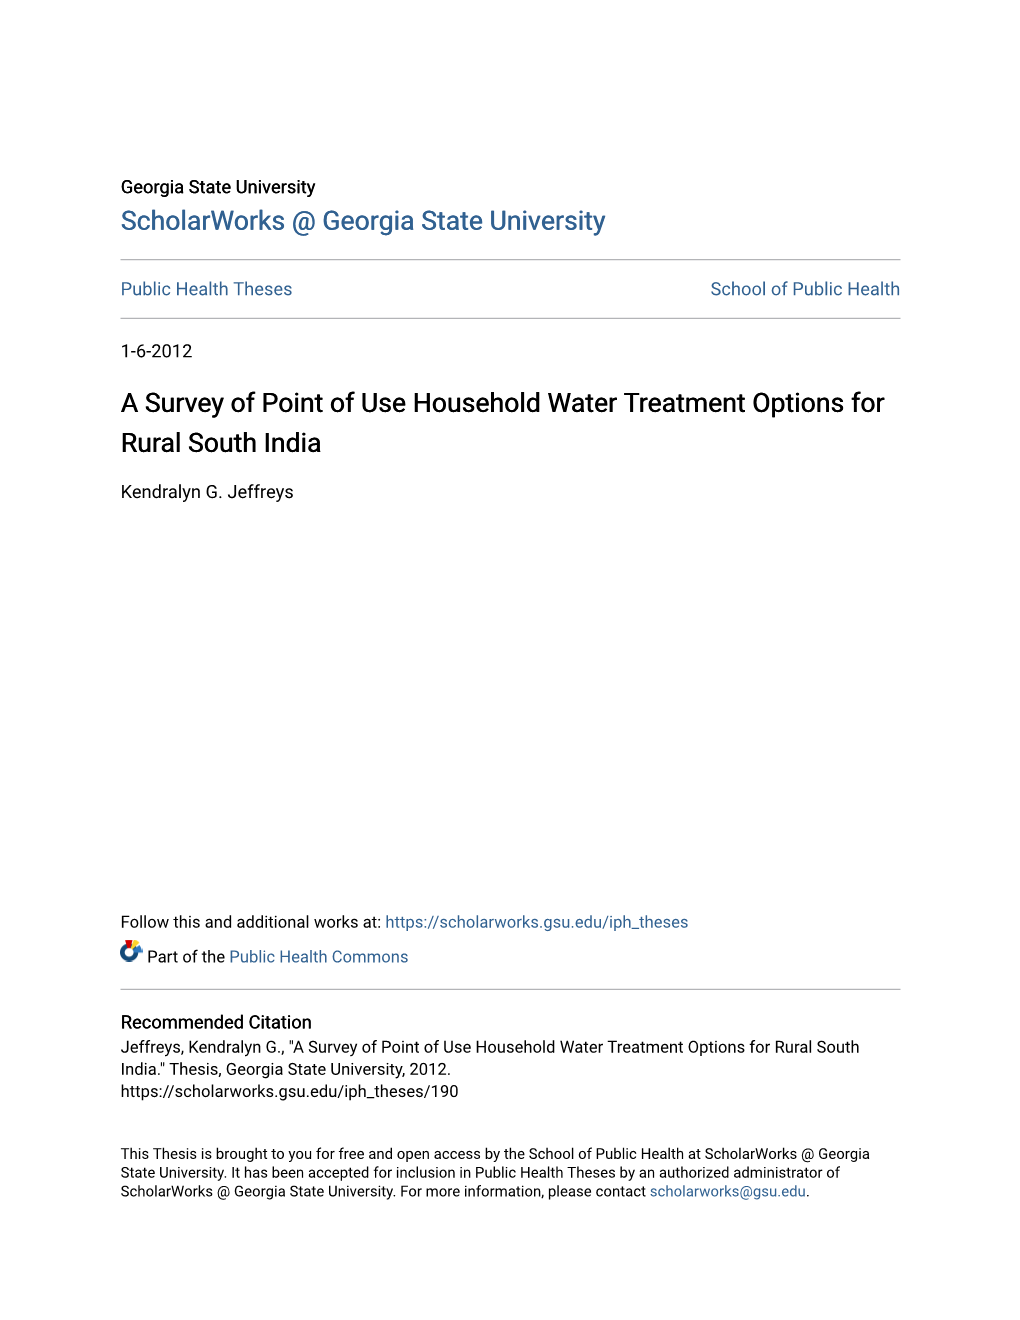 A Survey of Point of Use Household Water Treatment Options for Rural South India